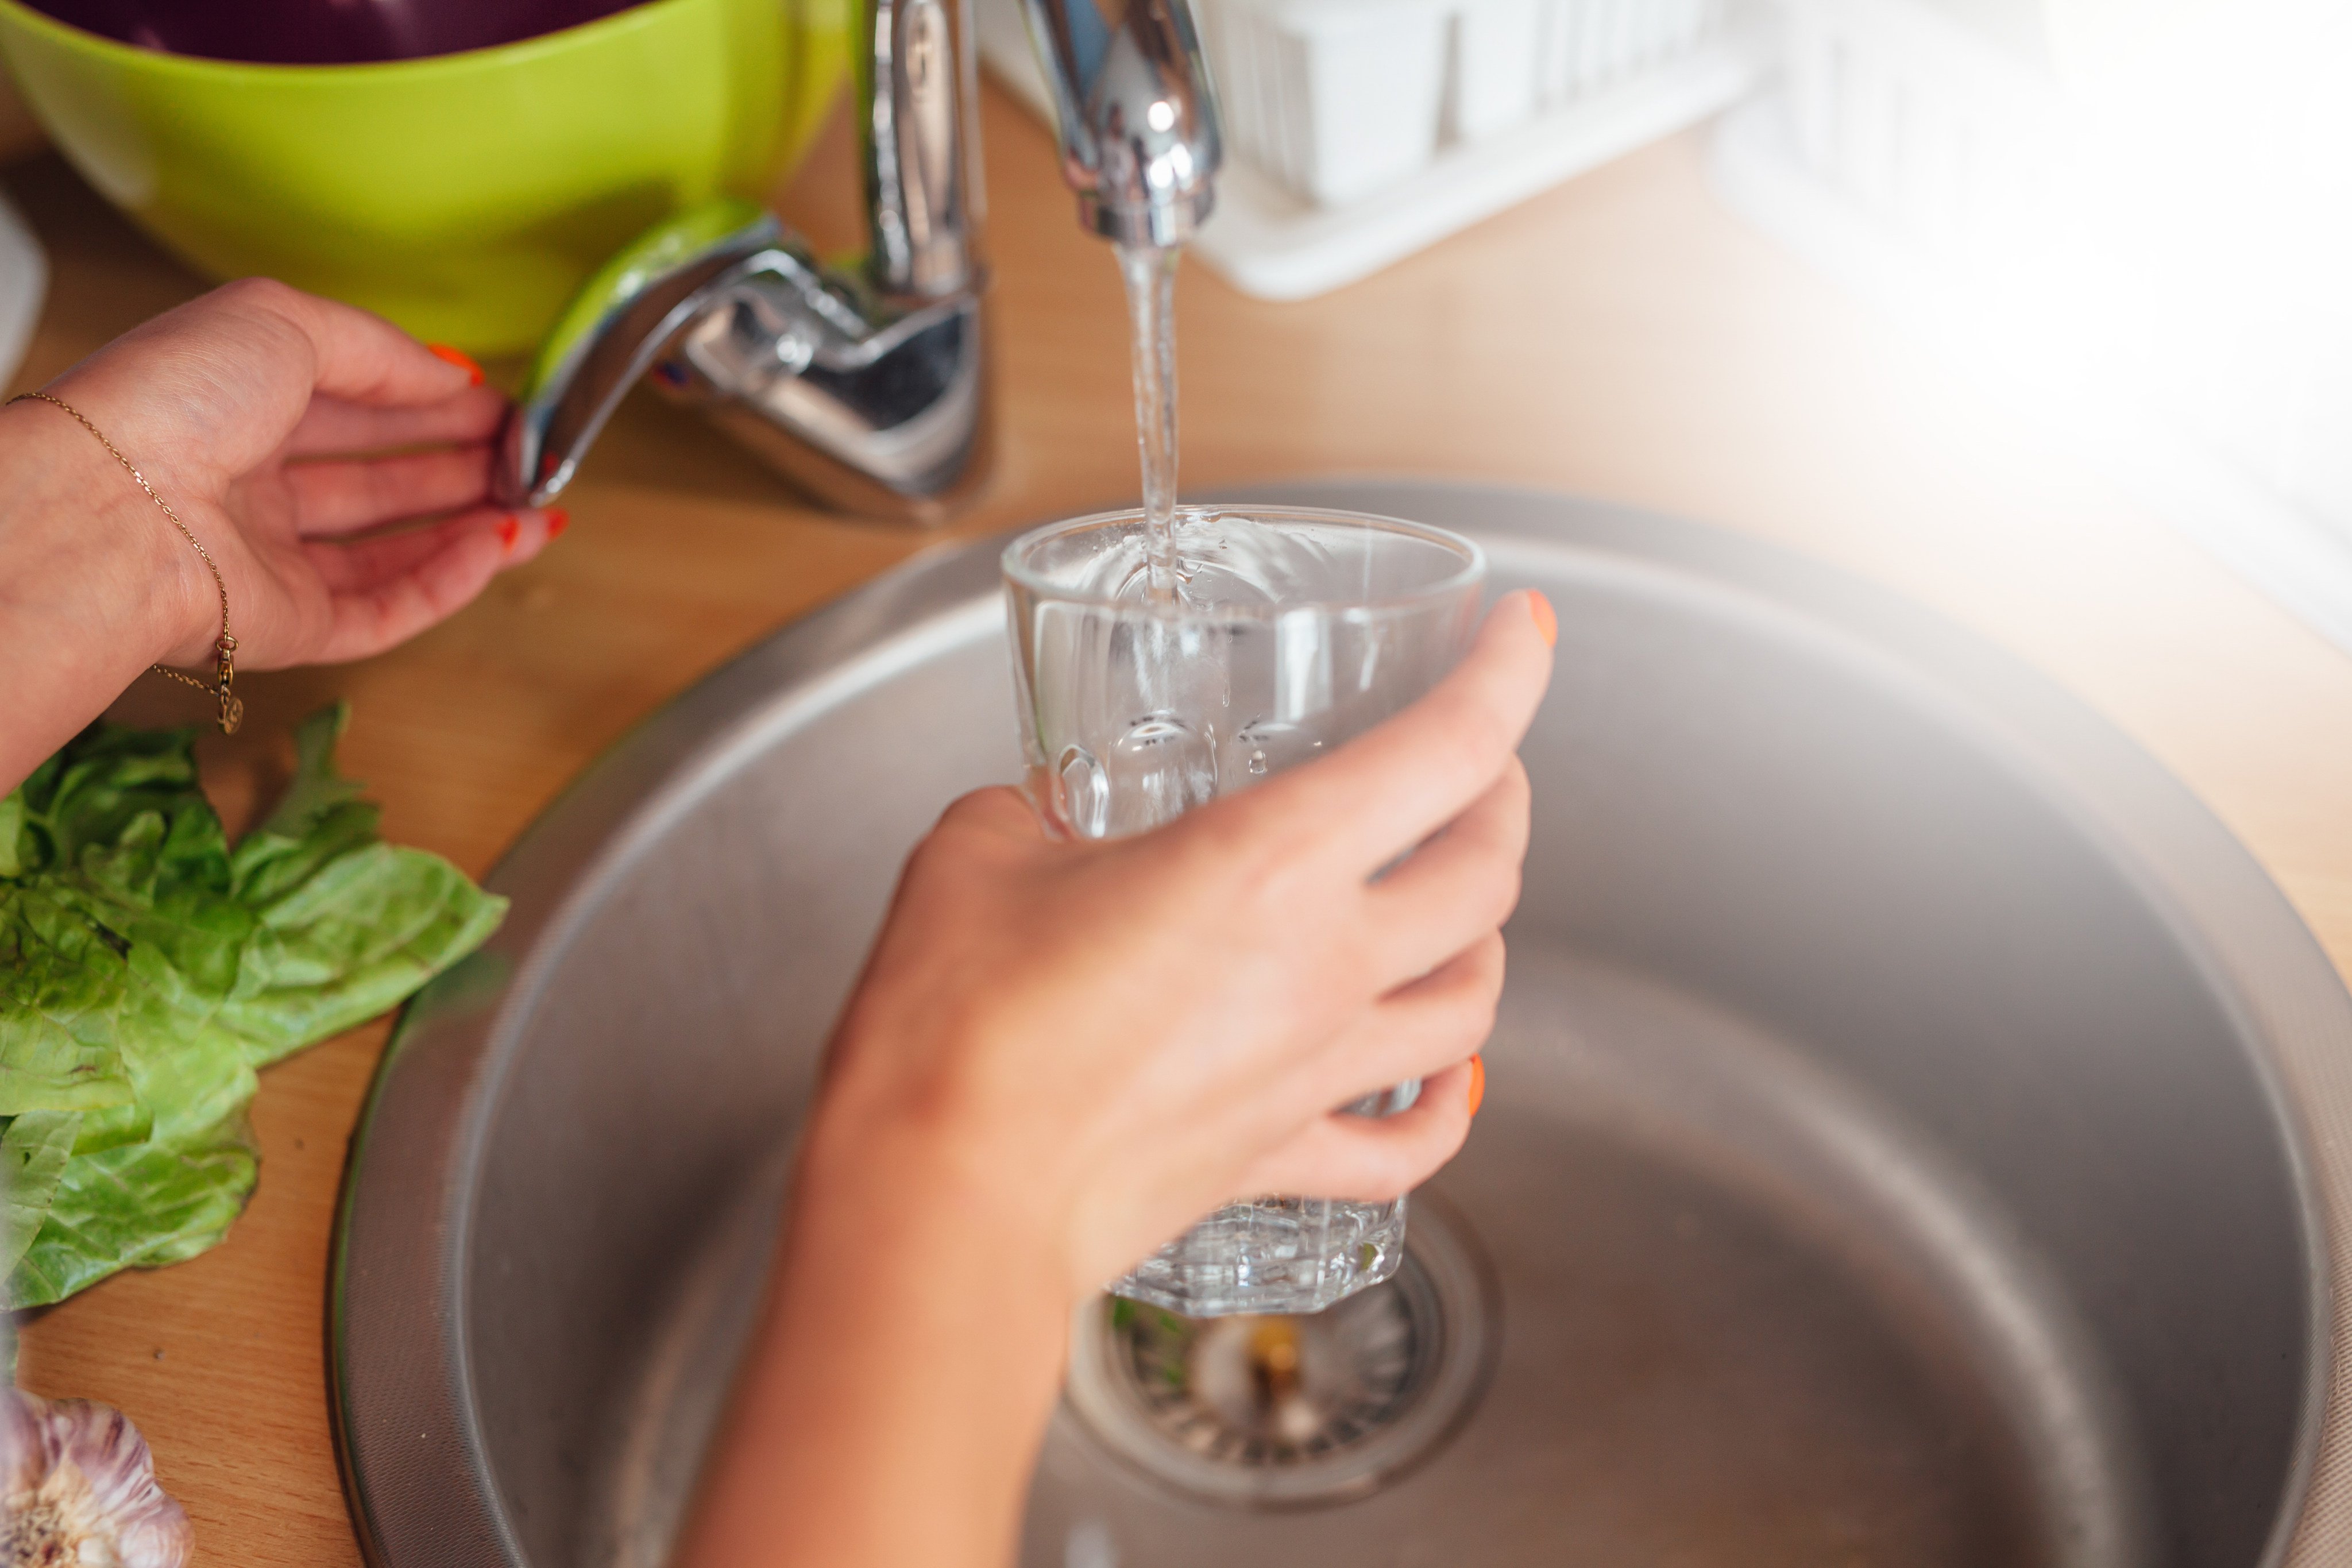 The US Environmental Protection Agency announce the first-ever limits on PFAS, or “forever chemicals,” in drinking water. Photo: Shutterstock